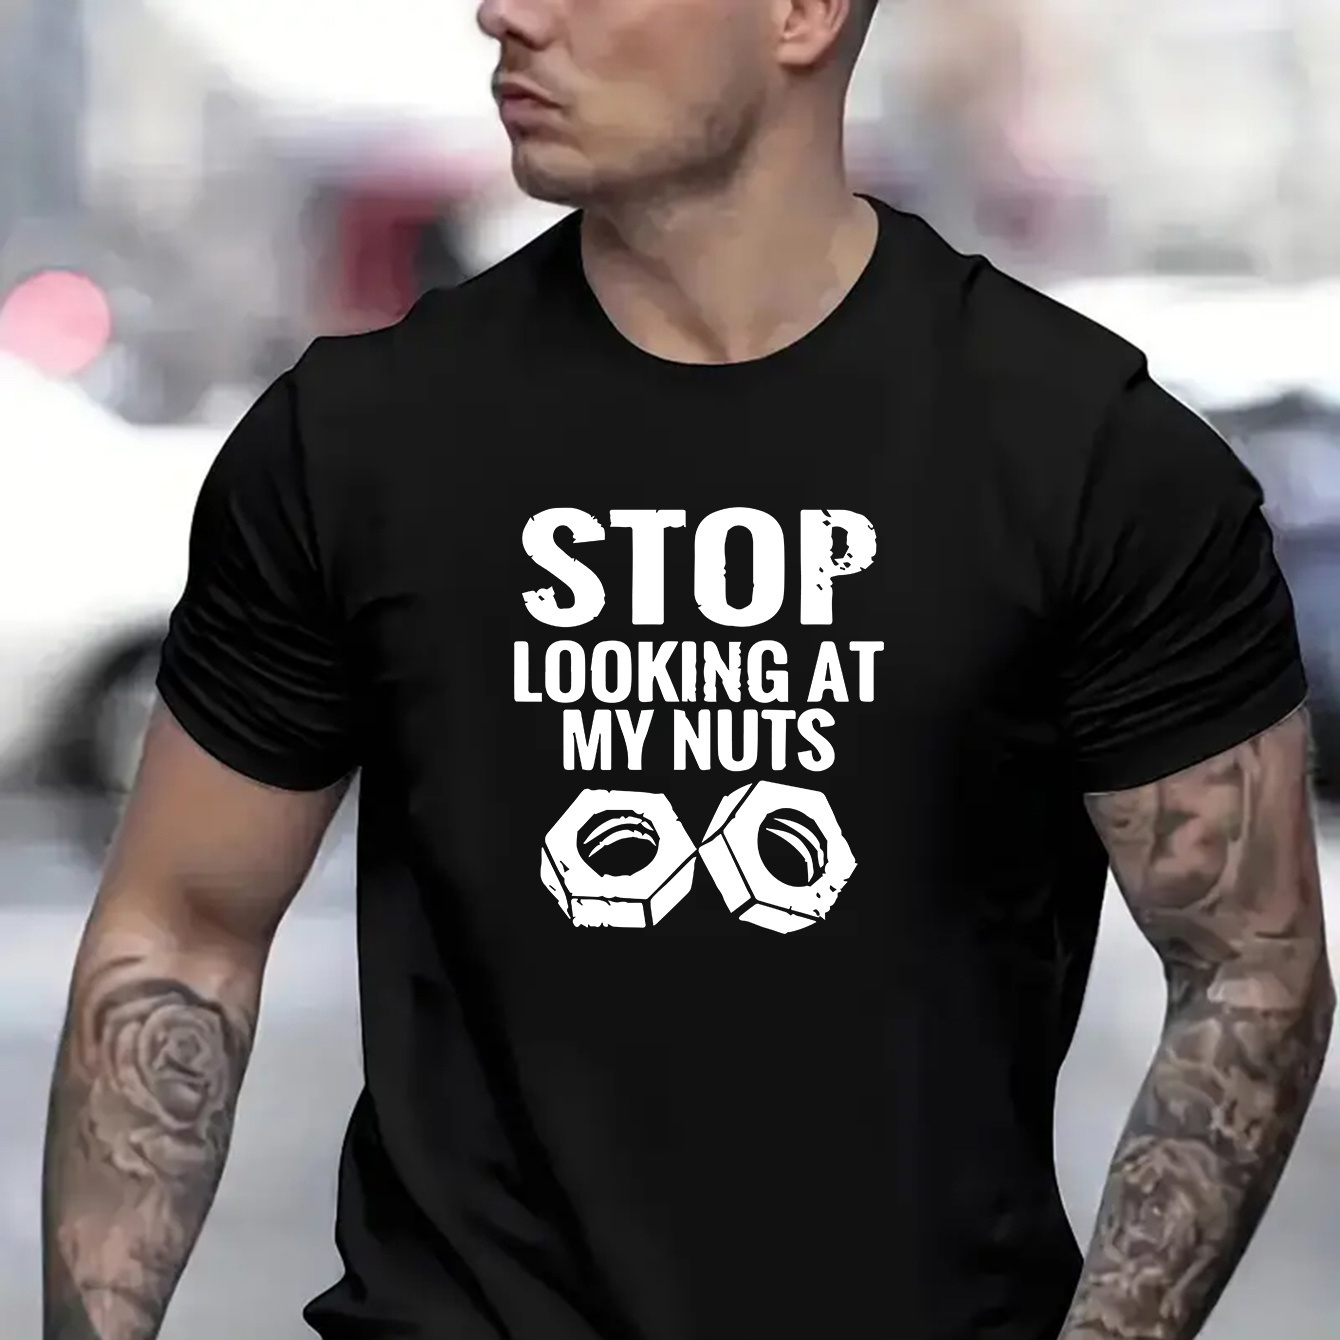 

Stop Looking At Funny Letter Print Men's Short Sleeve Crew Neck T-shirts, Comfy Breathable Casual Elastic Tops, Men's Clothing